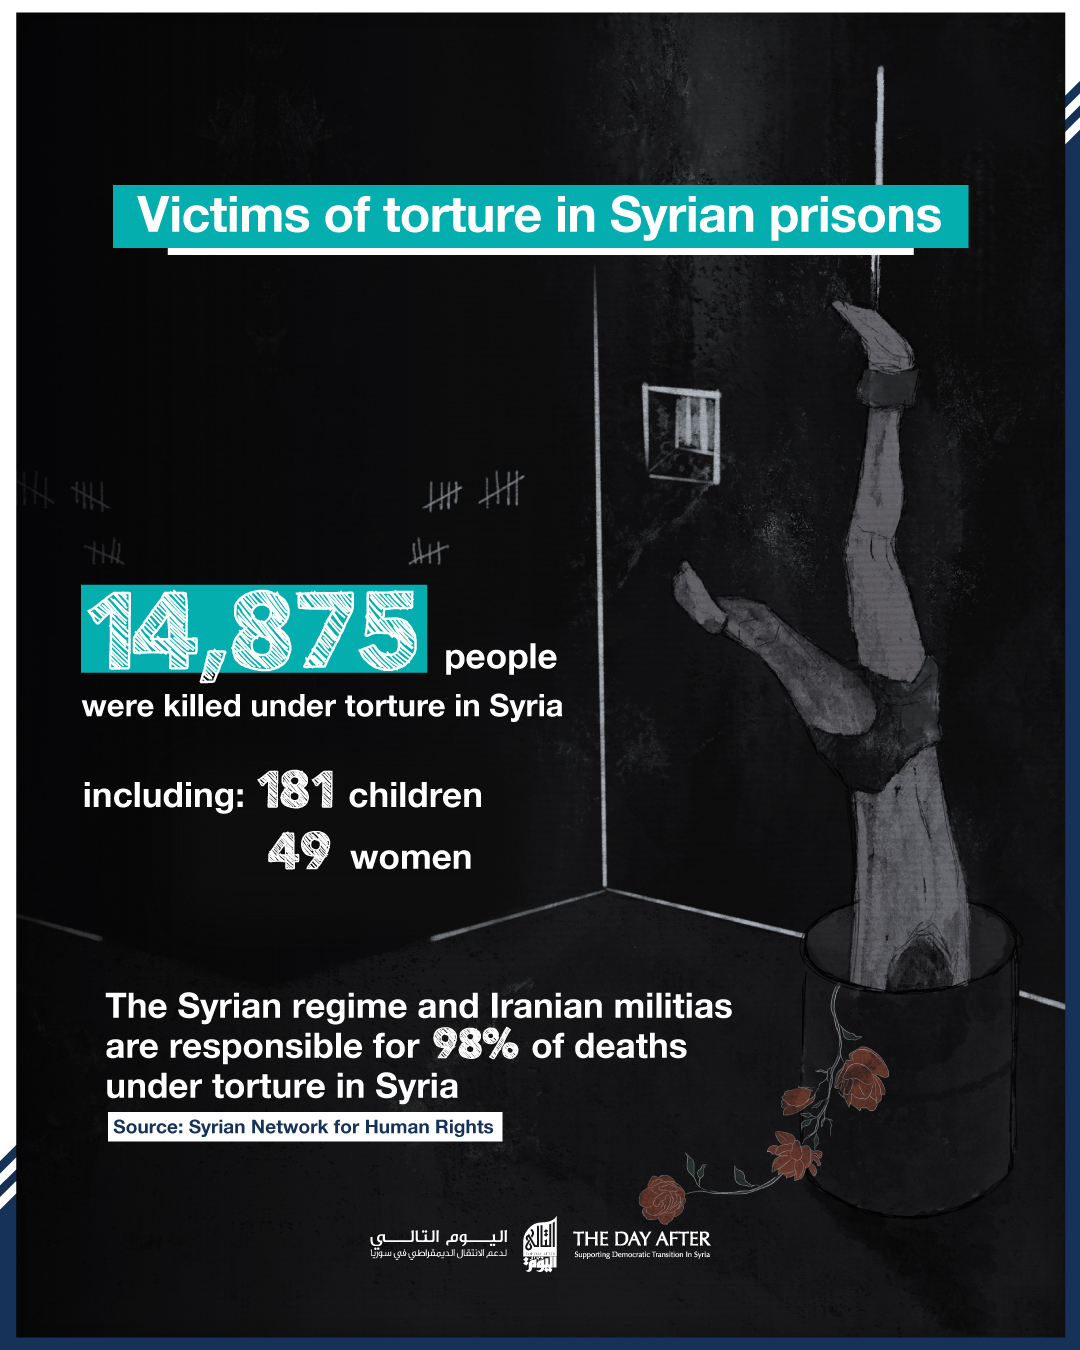 14,875 people were killed as a result of torture in Syrian prisons